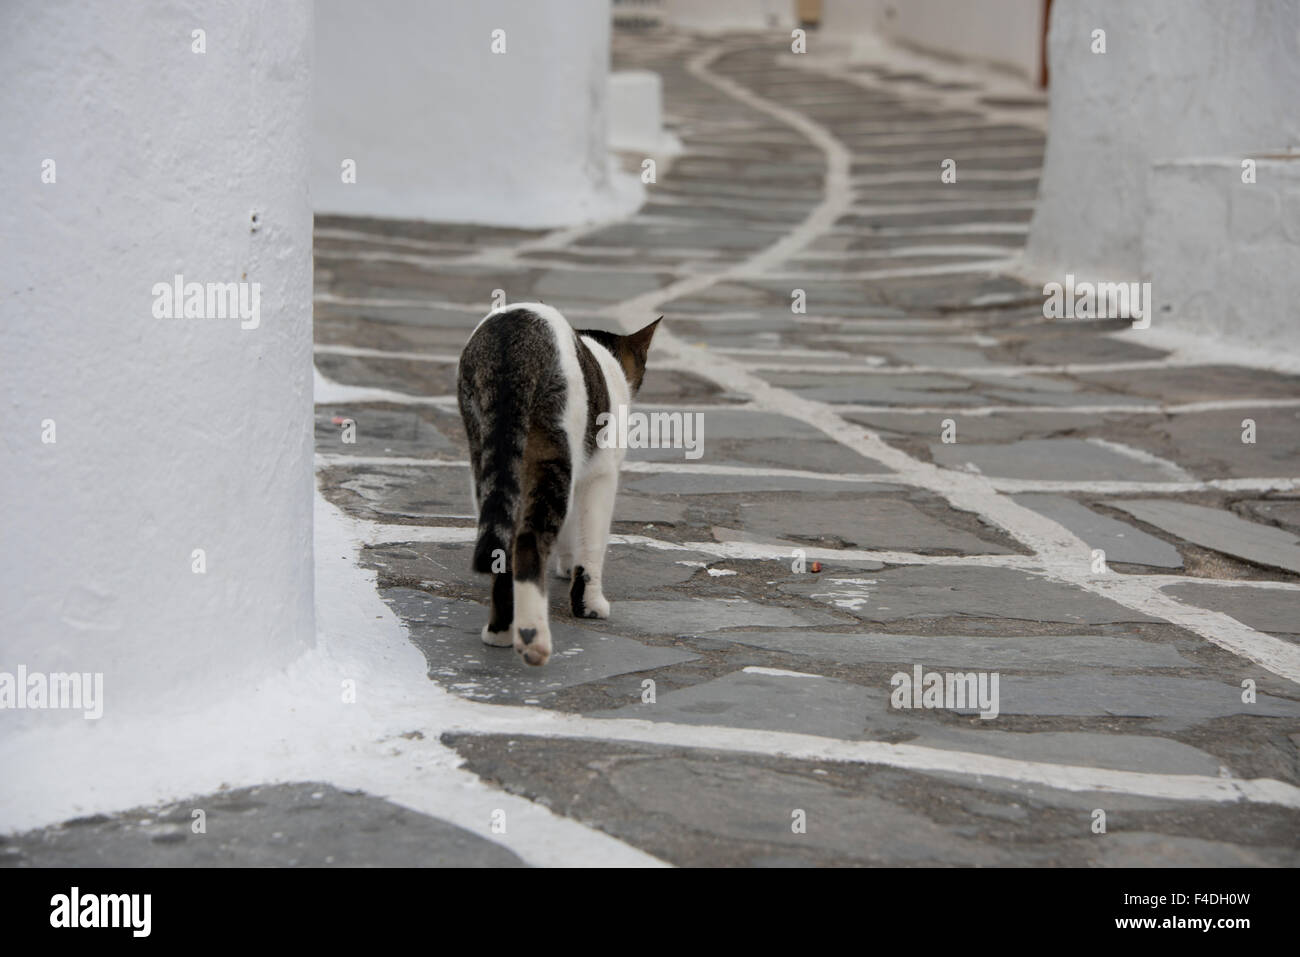 Greece, Cyclades, Mykonos, Hora. Greek cat in the alleys of Mykonos. (Large format sizes available). Stock Photo